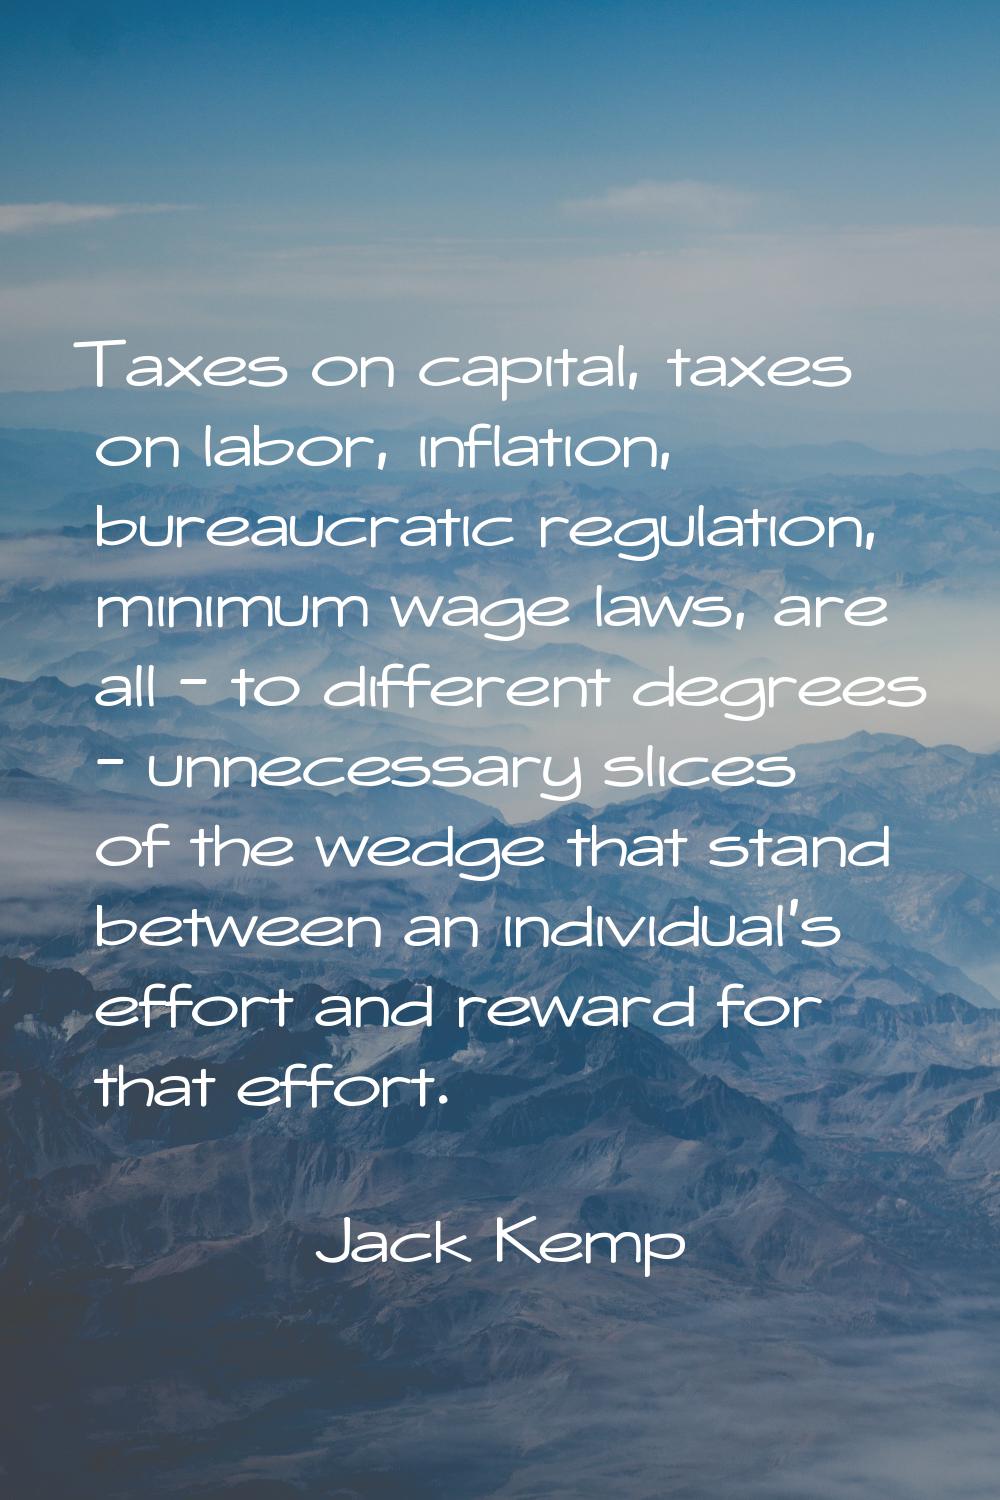 Taxes on capital, taxes on labor, inflation, bureaucratic regulation, minimum wage laws, are all - 